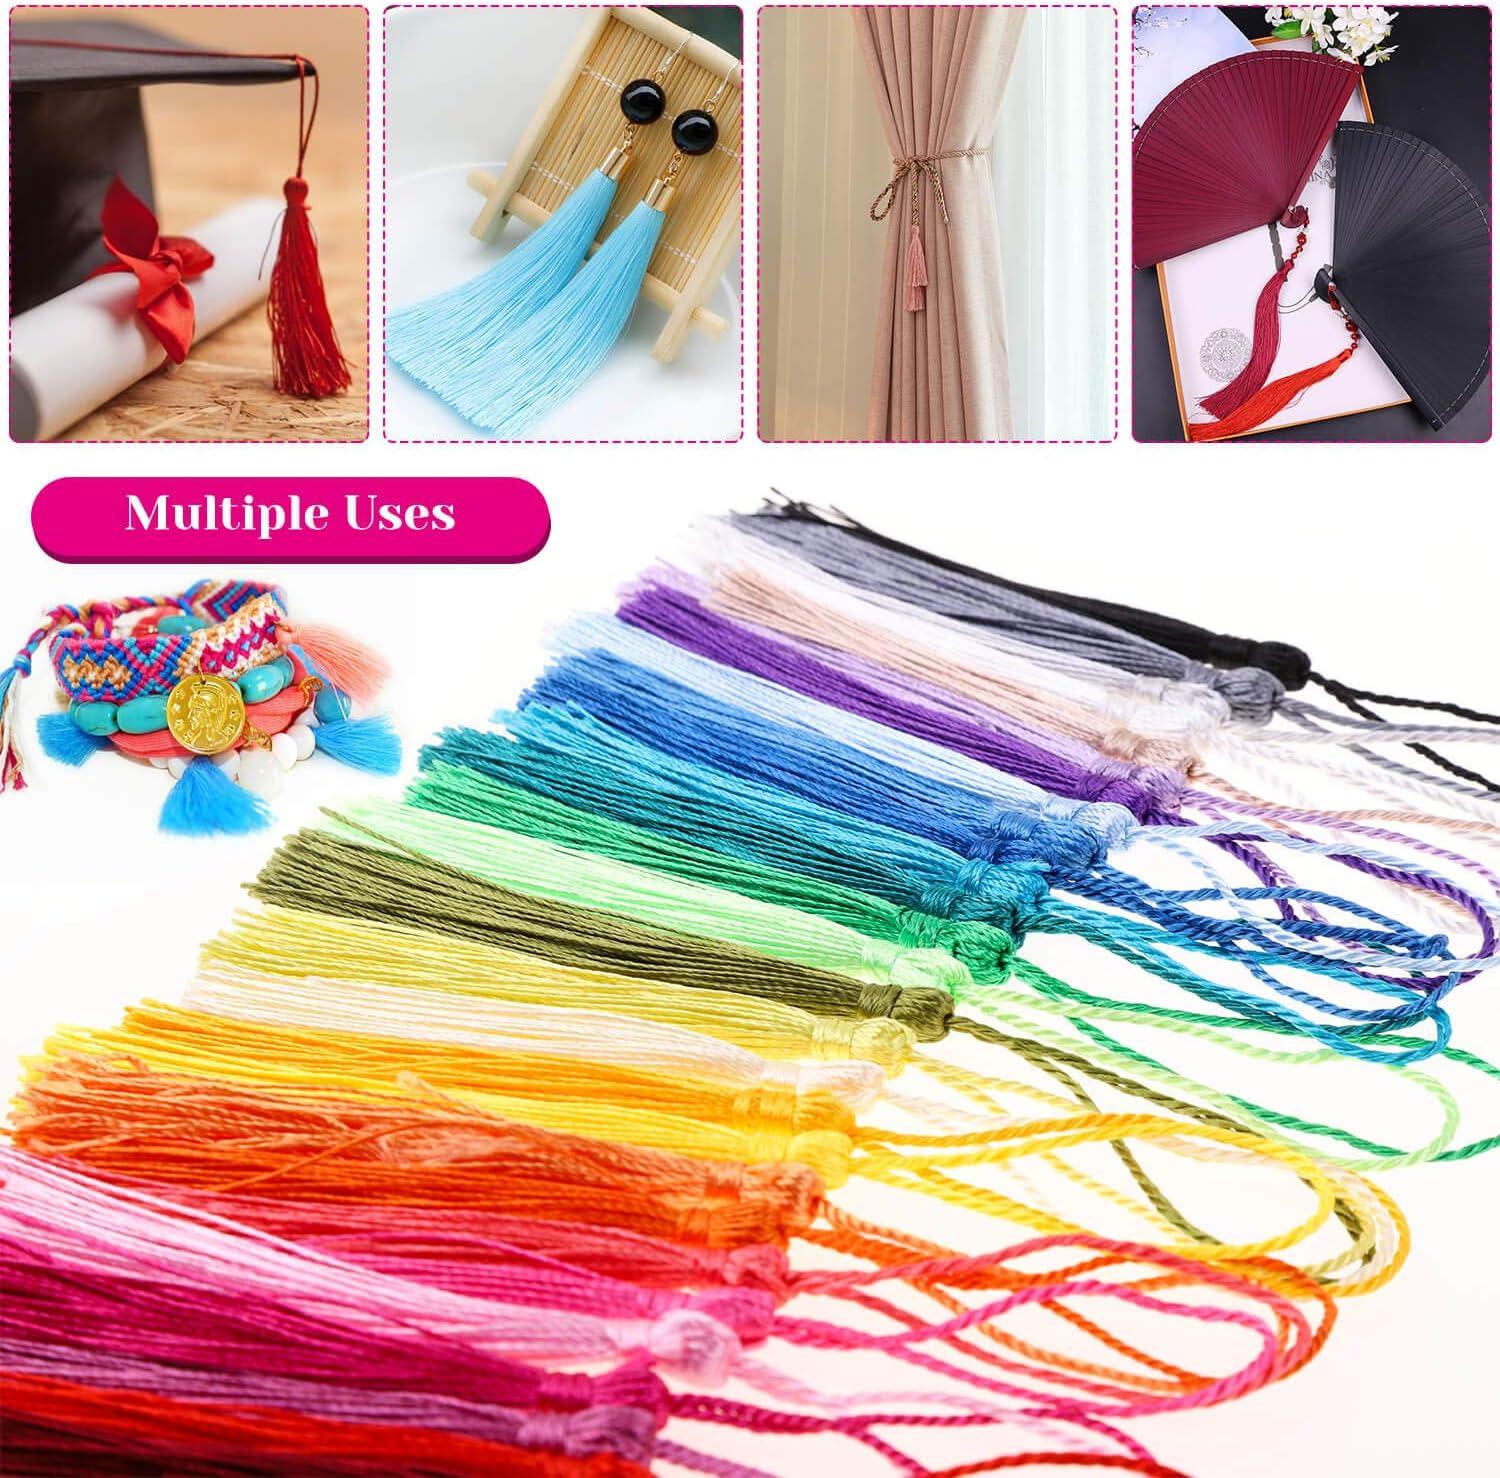 Tassels, Cridoz 120Pcs Bookmark Tassels Silky Handmade Soft Craft Mini  Tassels with Loops for Bookmarks, Crafts and Jewelry Making, 30 Colors 120  Multicolors